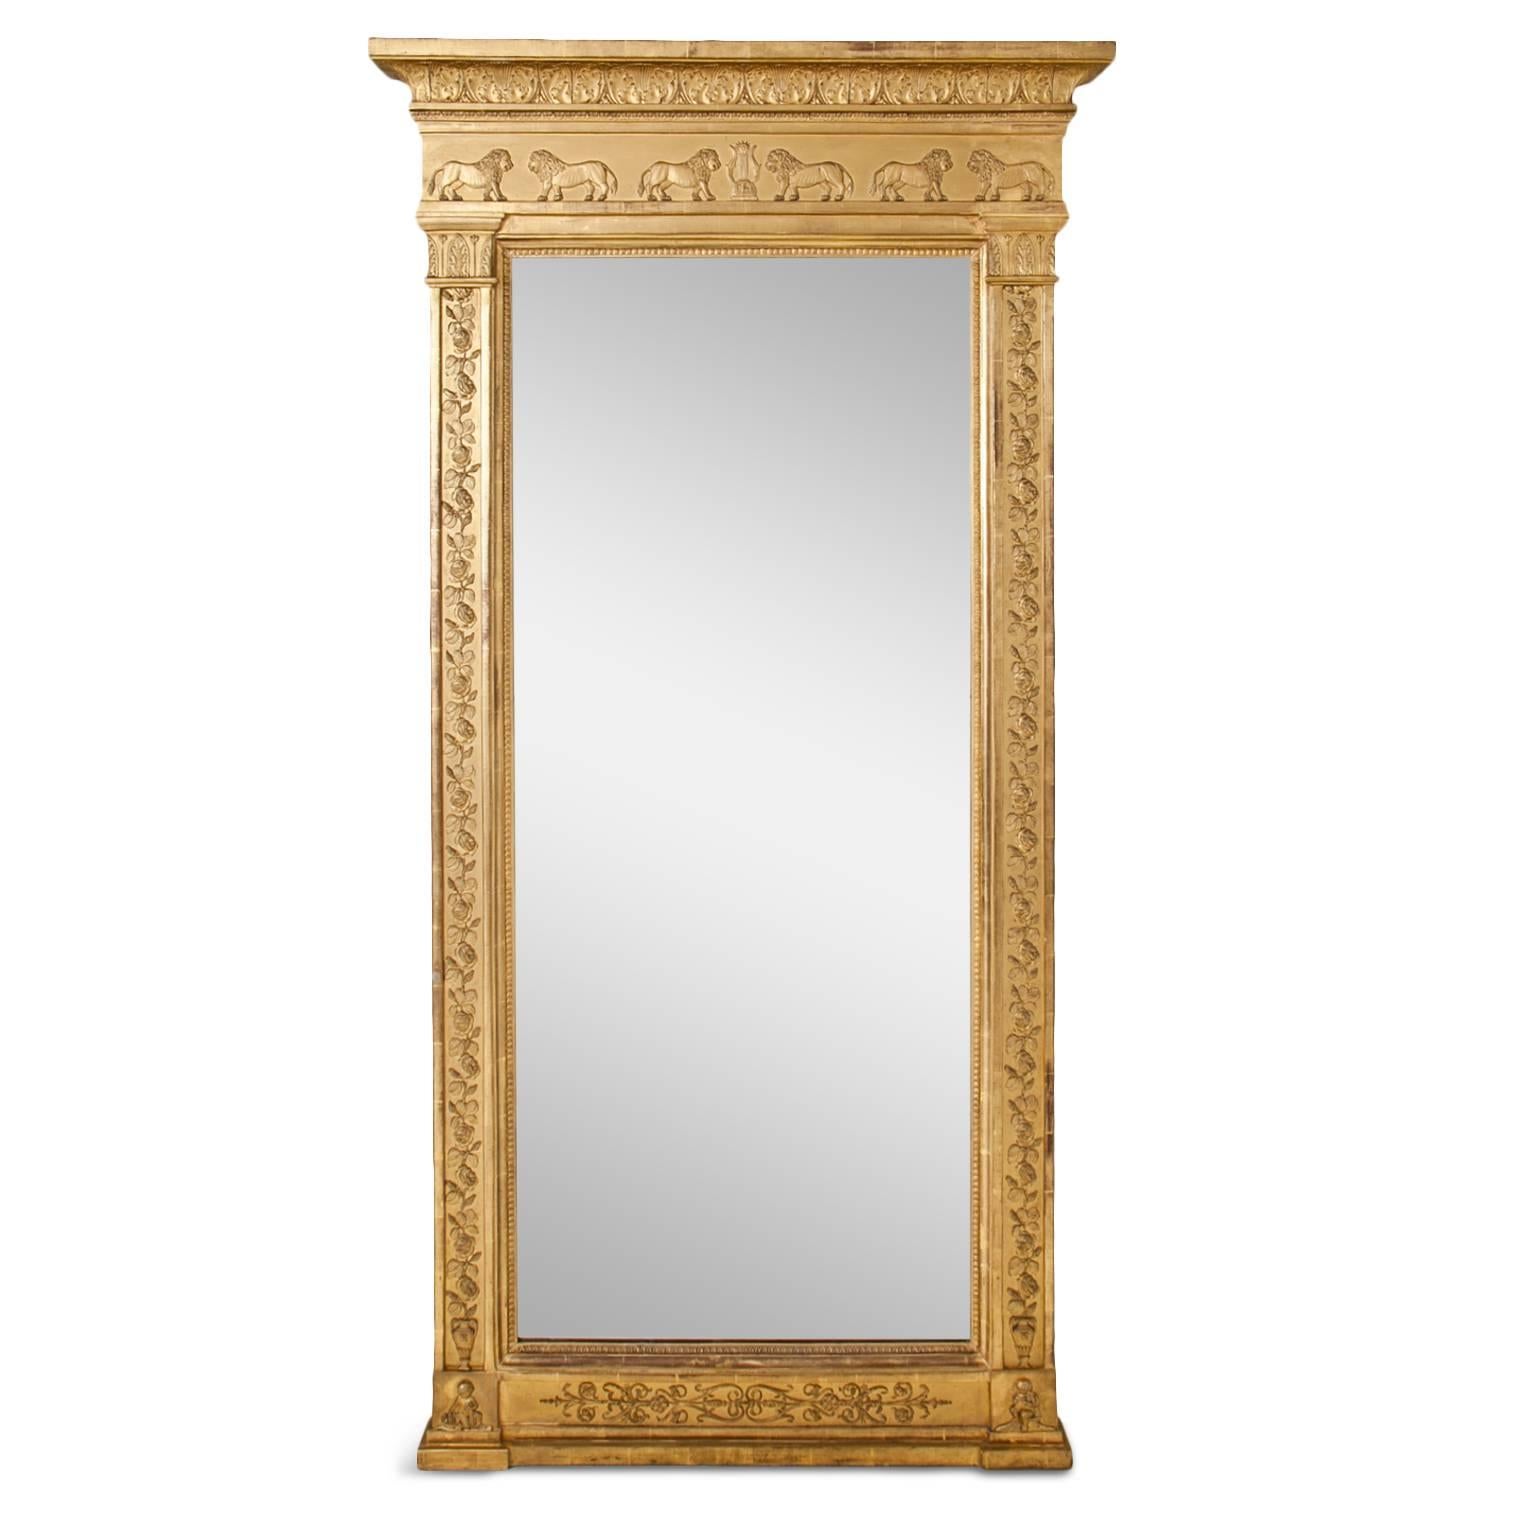 Neoclassical Wall Mirror, Early 19th Century